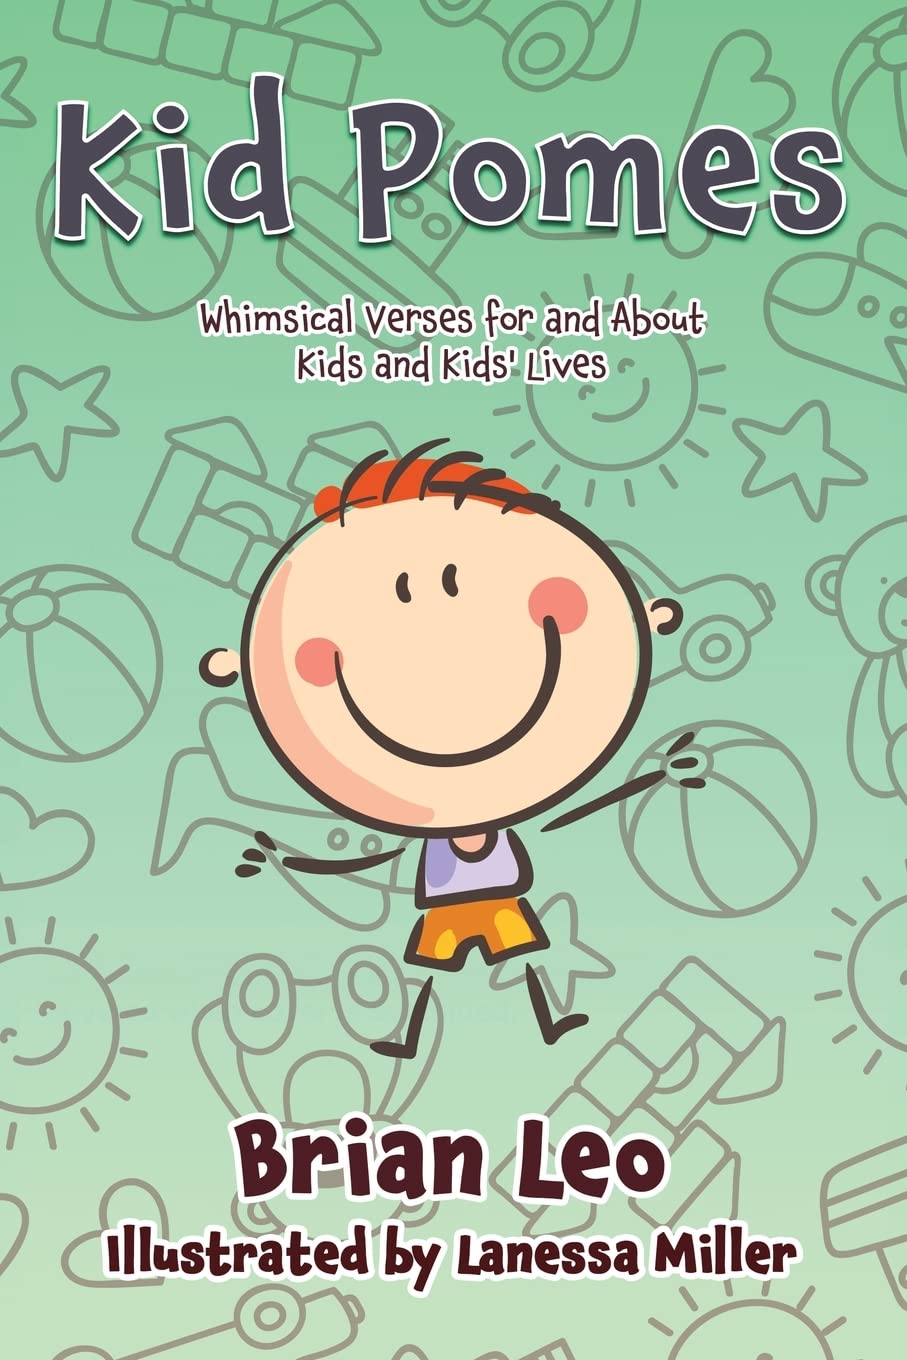 Author's Tranquility Press presents "Kid Pomes": A Collection of Poems for Kids